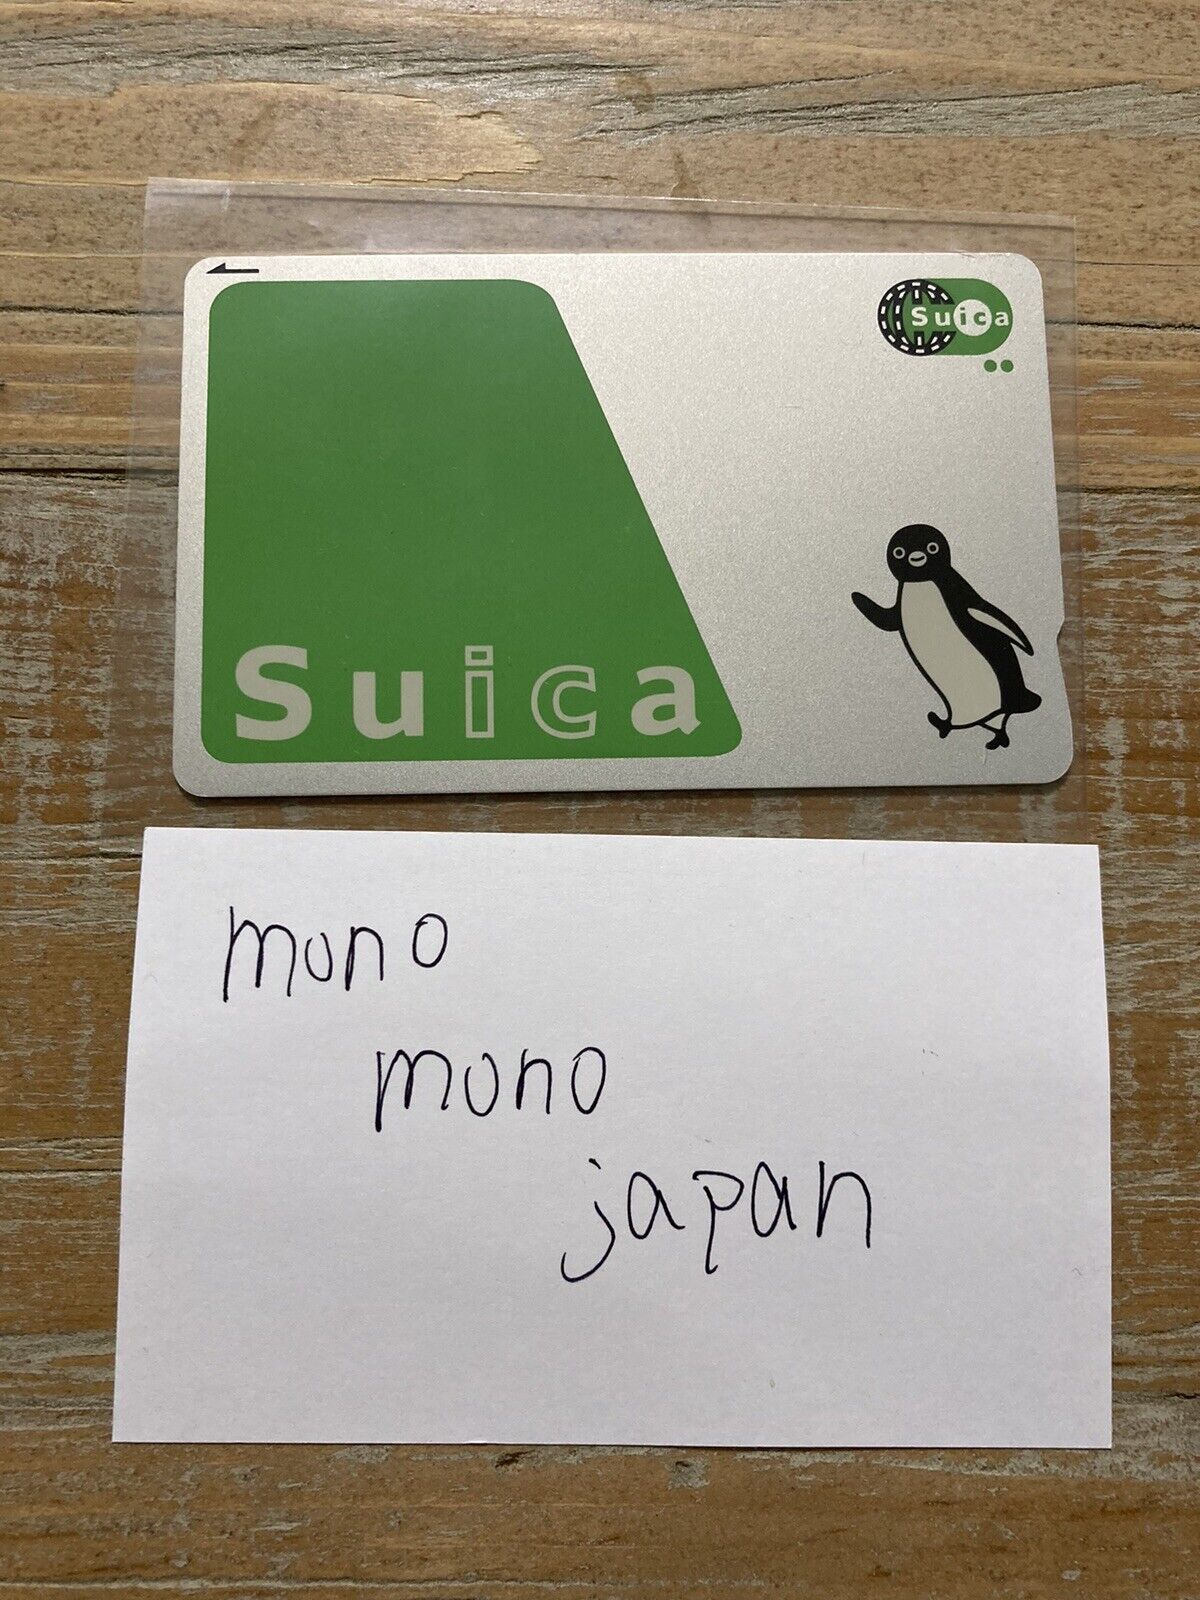 USED Penguin Normal Suica Prepaid Transportation IC card JR East Tested